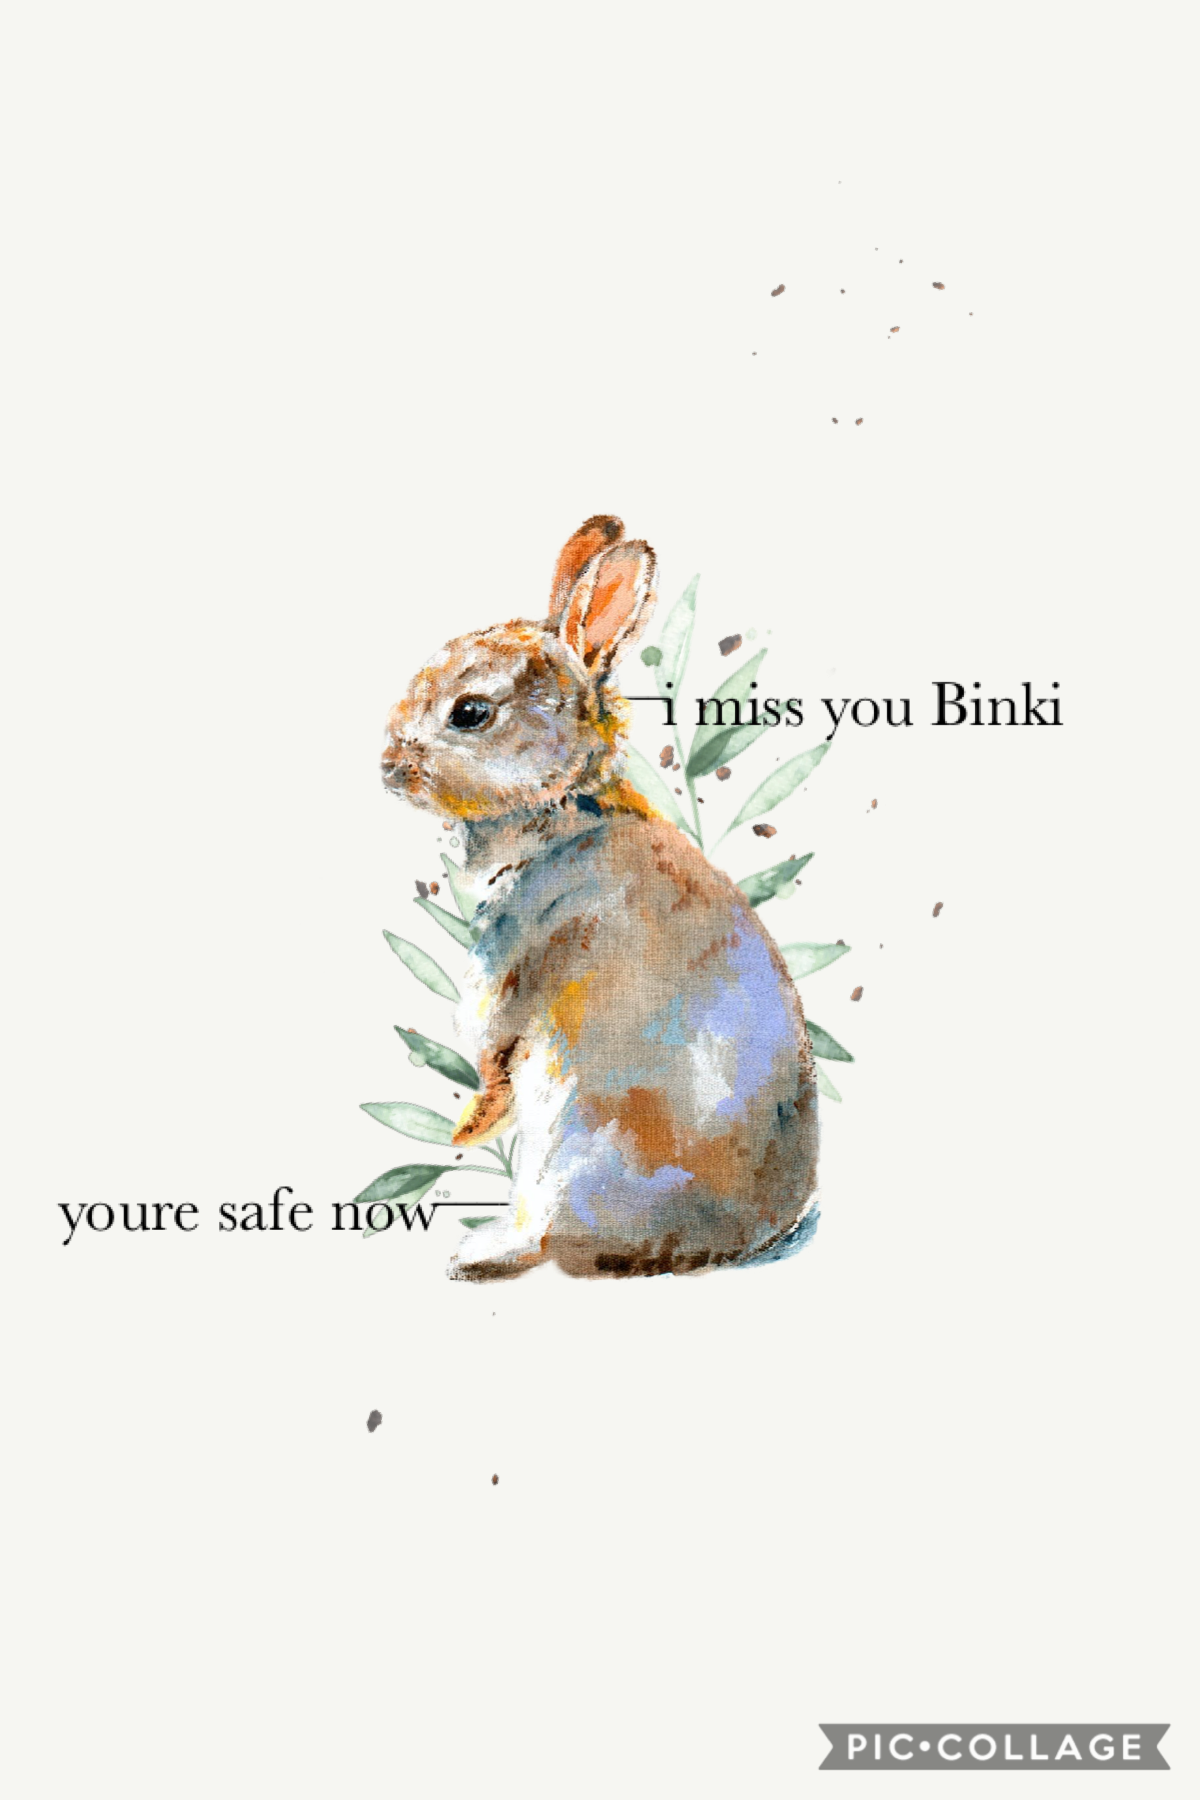 rest in peace Binki 🐇
🍂 
i know this is quite a shocking post, but i’d really appreciate if you could check out the remixes in this post 🙏

🐰 